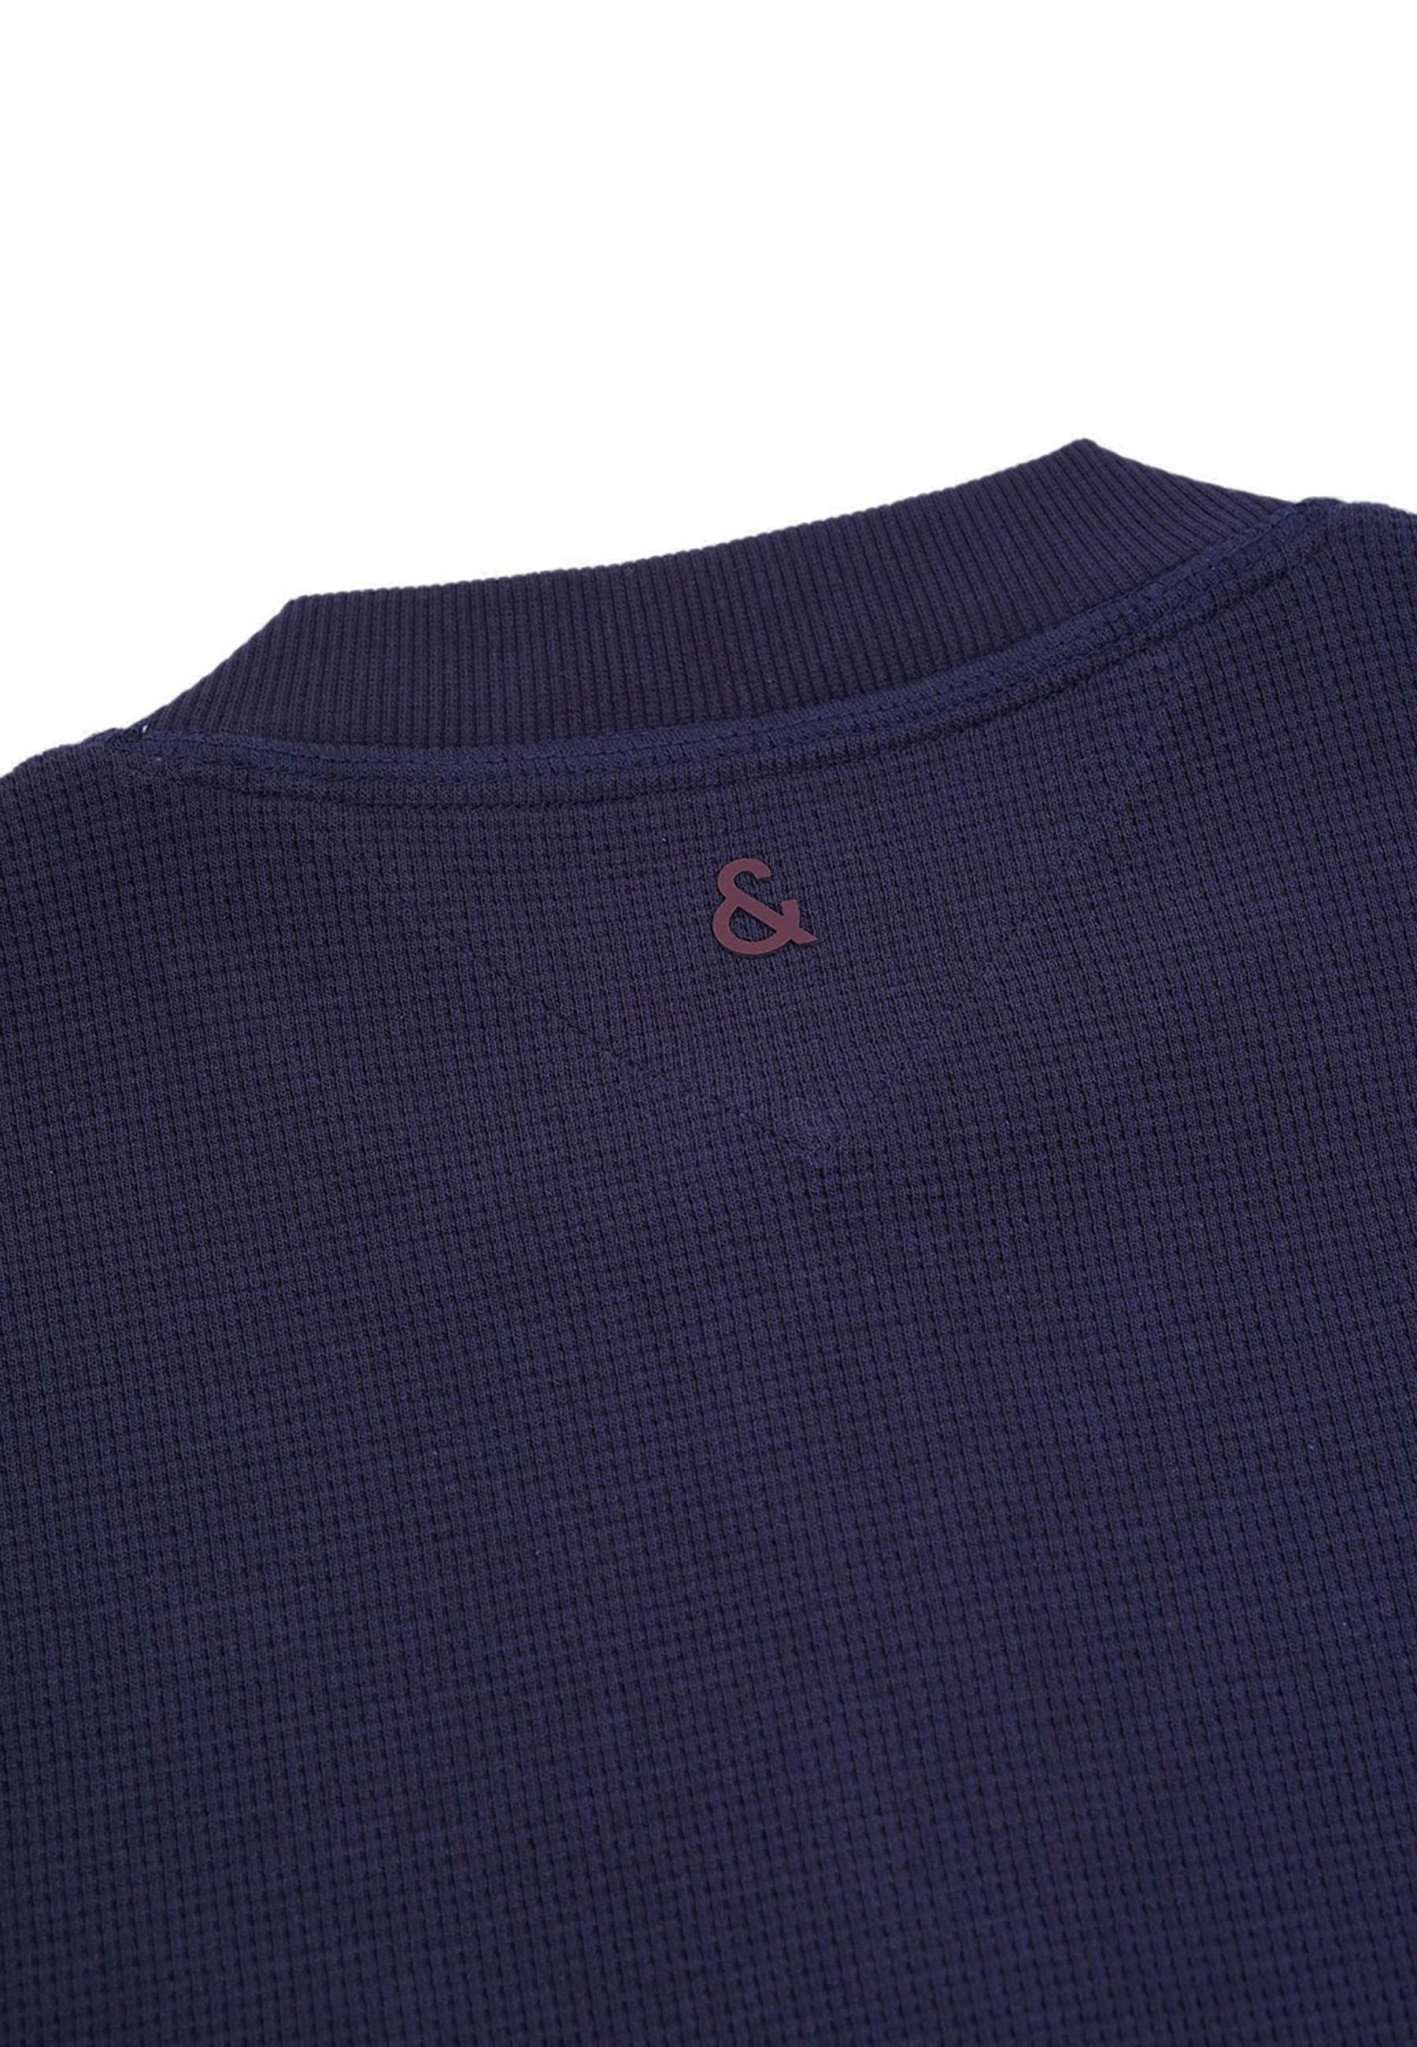 Serafino-Waffle in Navy Sweatshirts Colours and Sons   